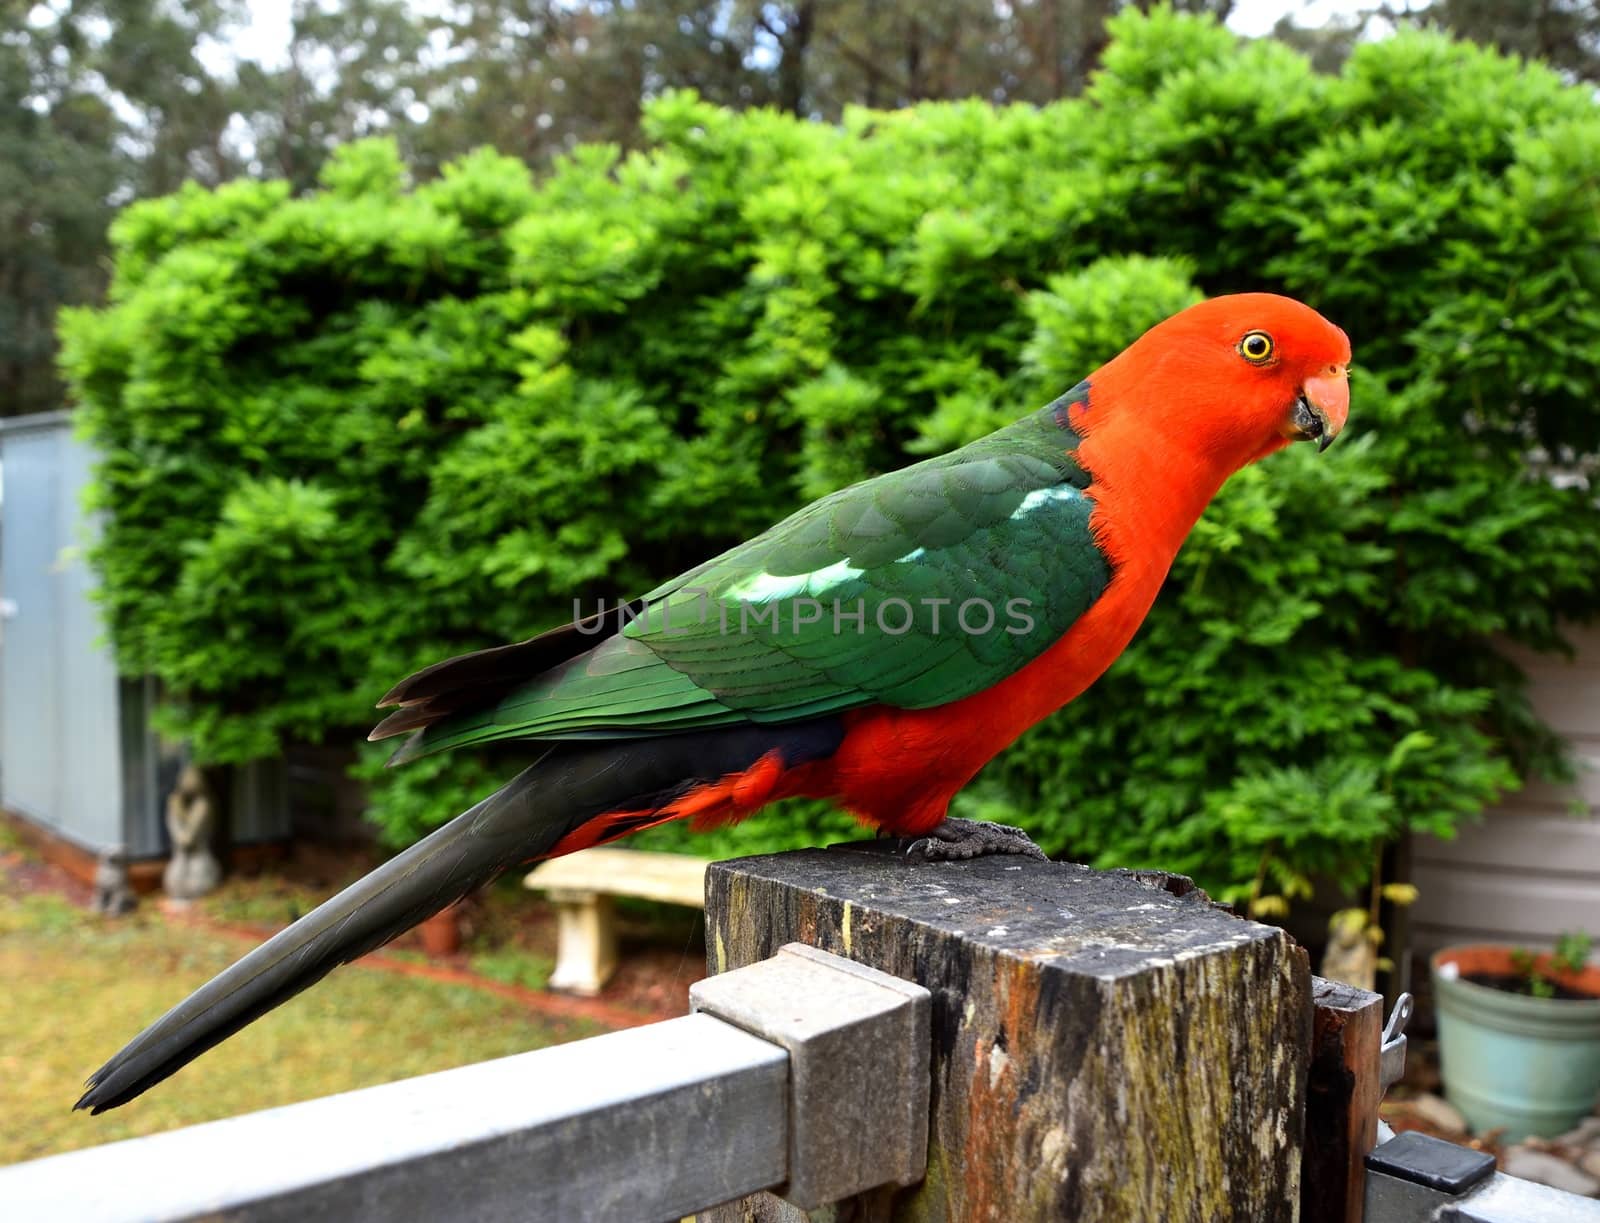 Male King Parrot sitting on a fence